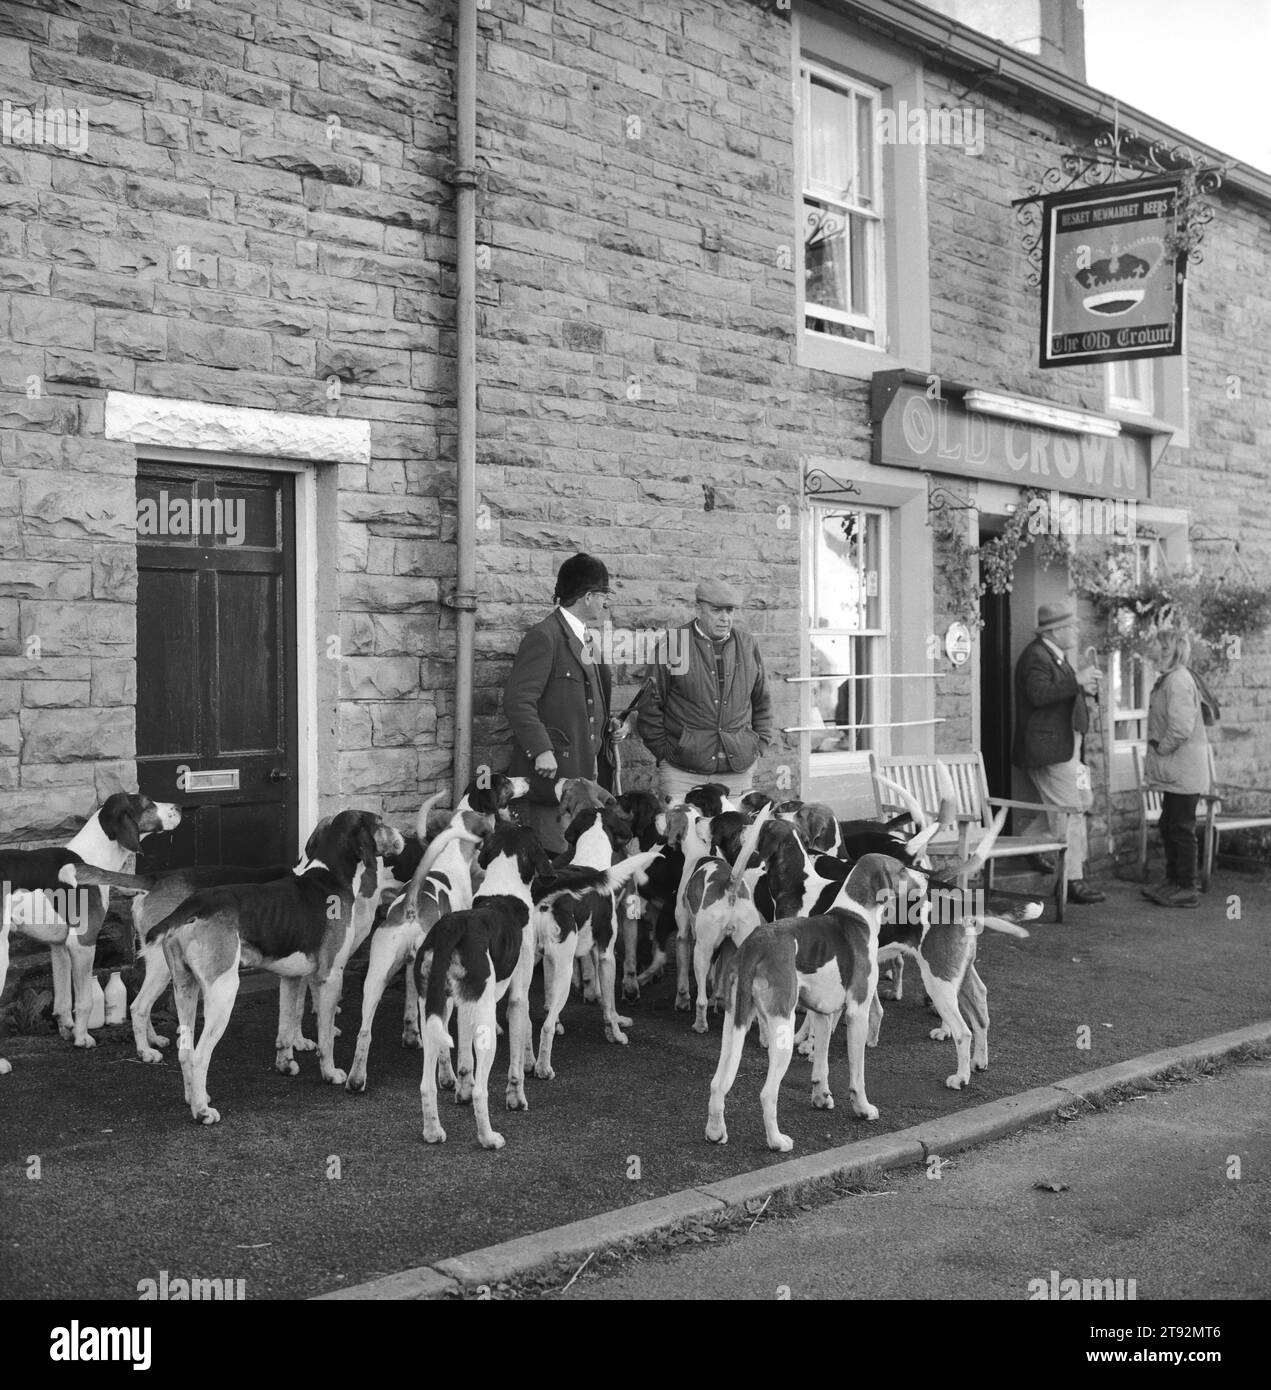 Fox Hunting UK, The Lake District The Blencathra Foxhounds. Barry Todhunter manages the hounds outside The Old Crown while many supporters meet inside to sample the locally brewed beers. . Hesket Newmarket, Cumbria. 2002, 2000s England HOMER SYKES Stock Photo